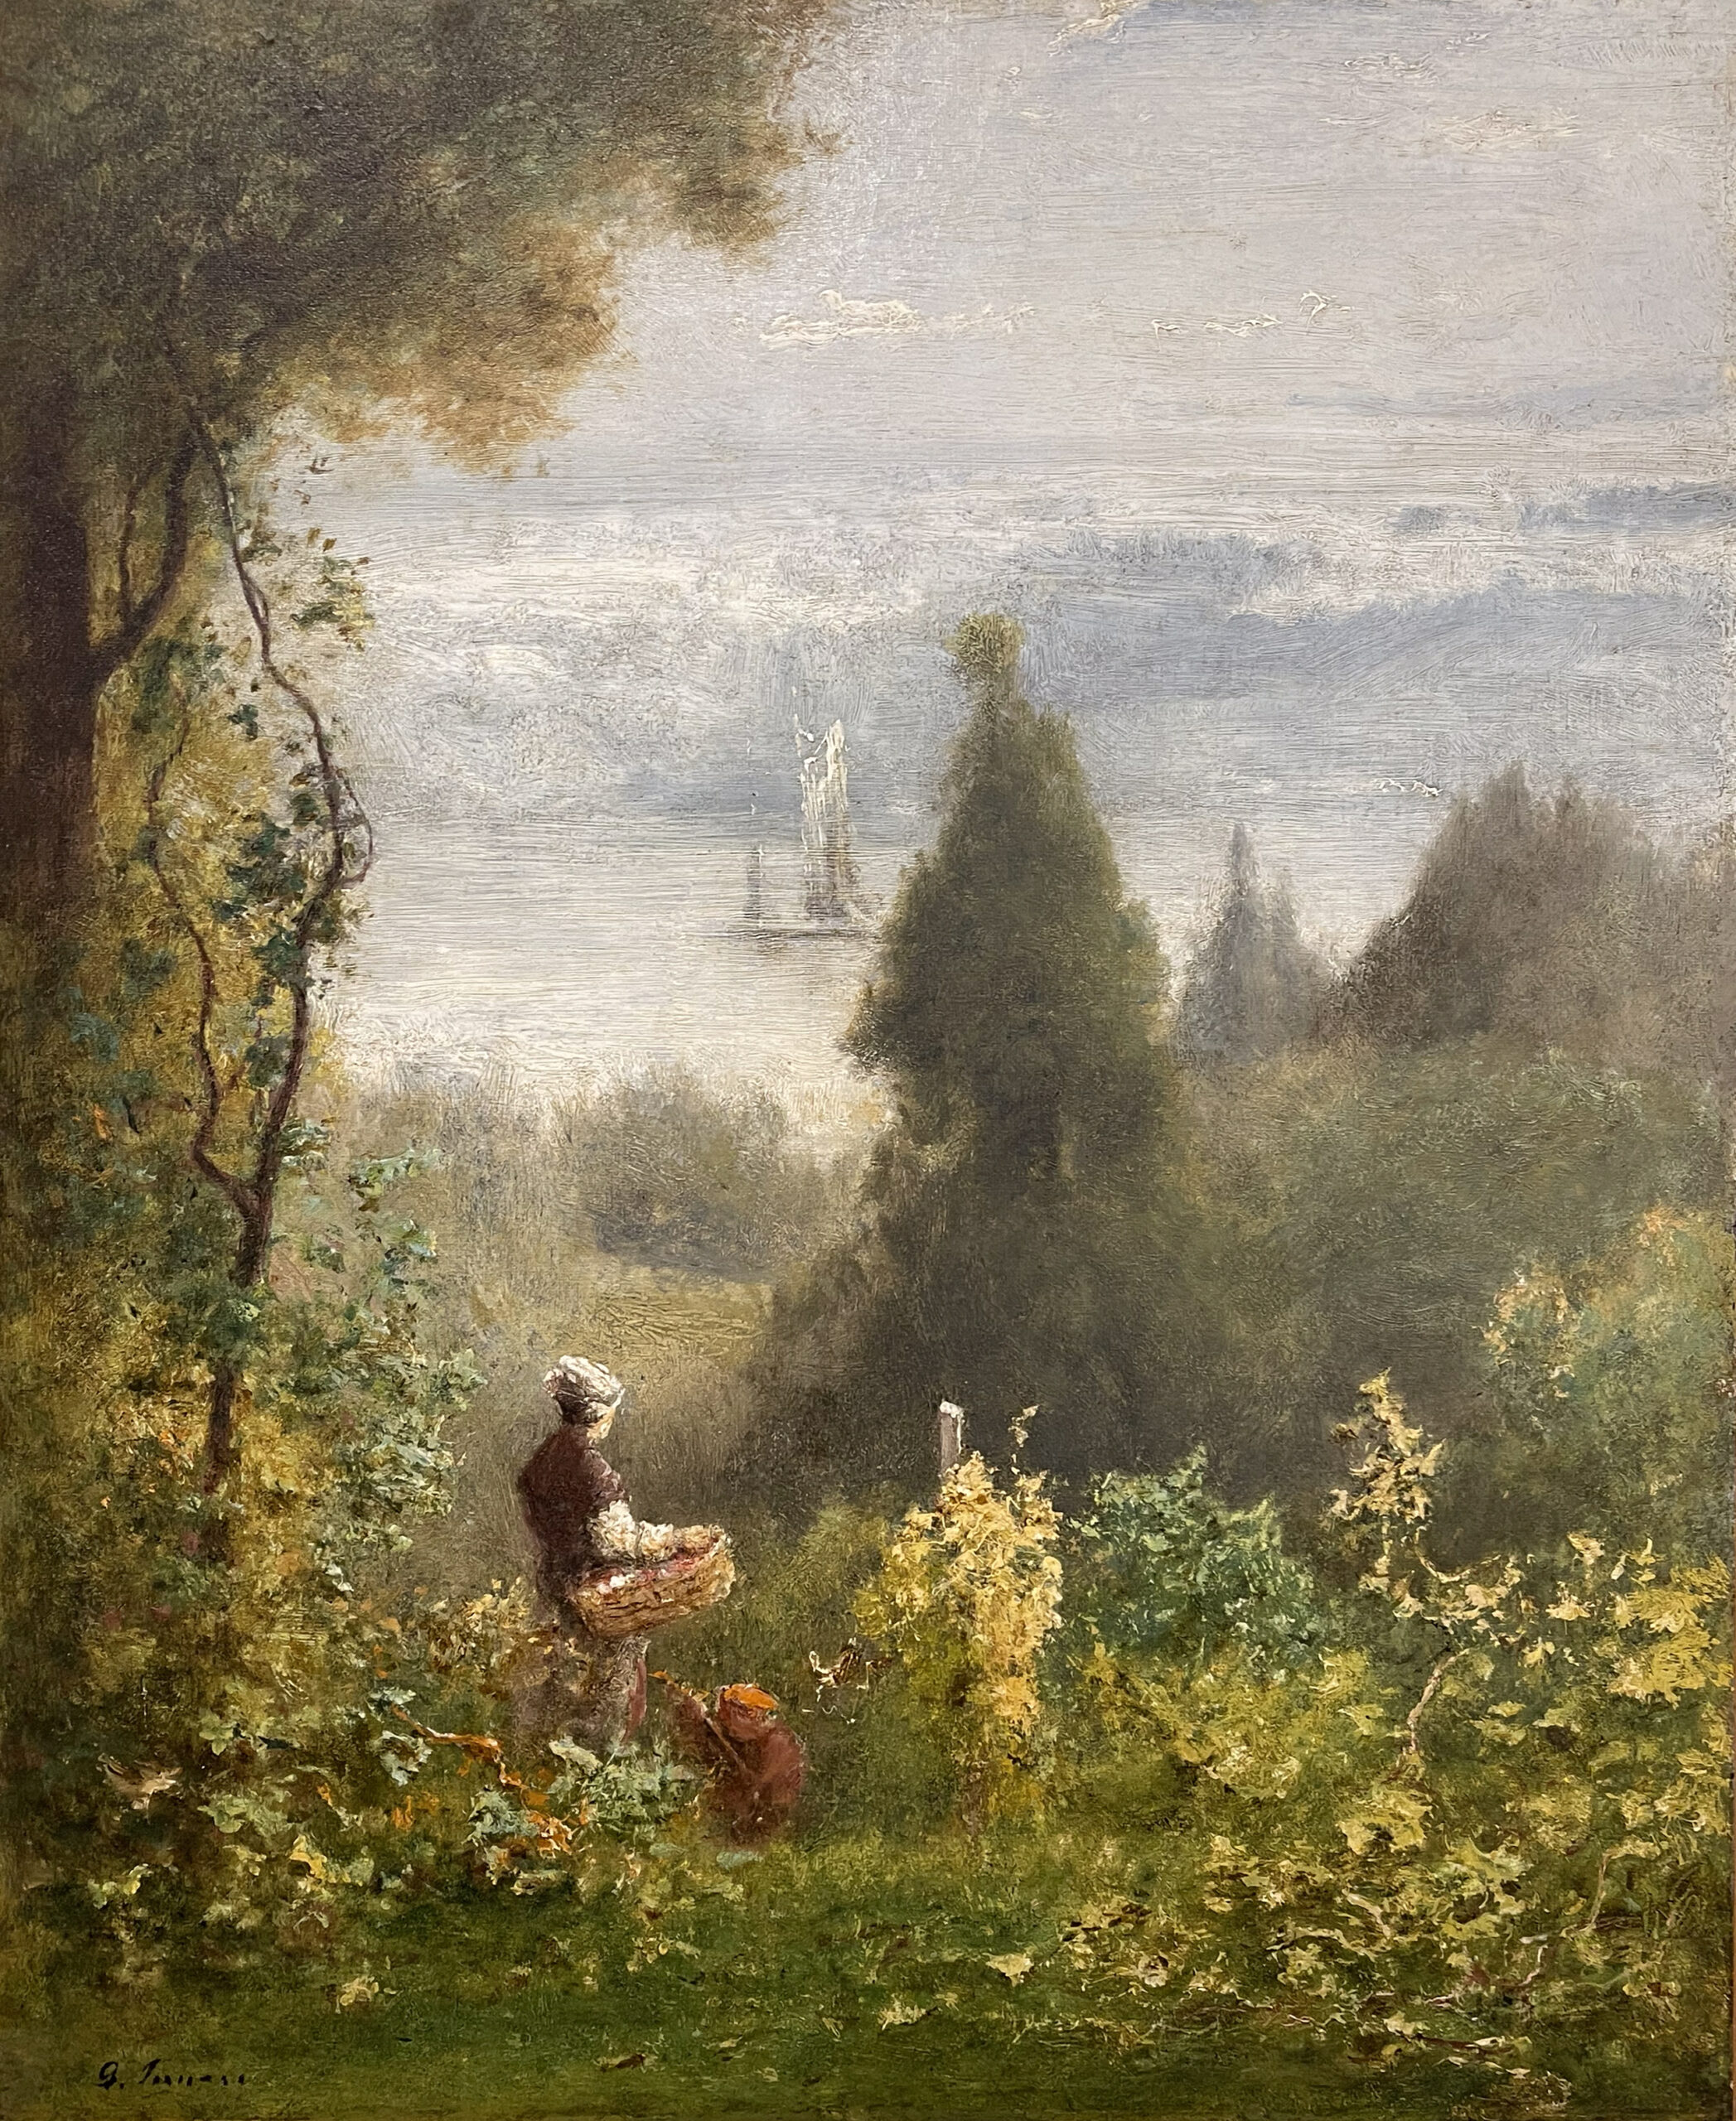 Visit Hastings, A lady holding a basket dressed in a white blouse and black shawl stands in a hill that slopes down to the Hudson River. She is surrounded by green trees and shrubs in summer foliage. In the distance a sailboat can be seen on the river with a grey-blue sky and clouds behind.